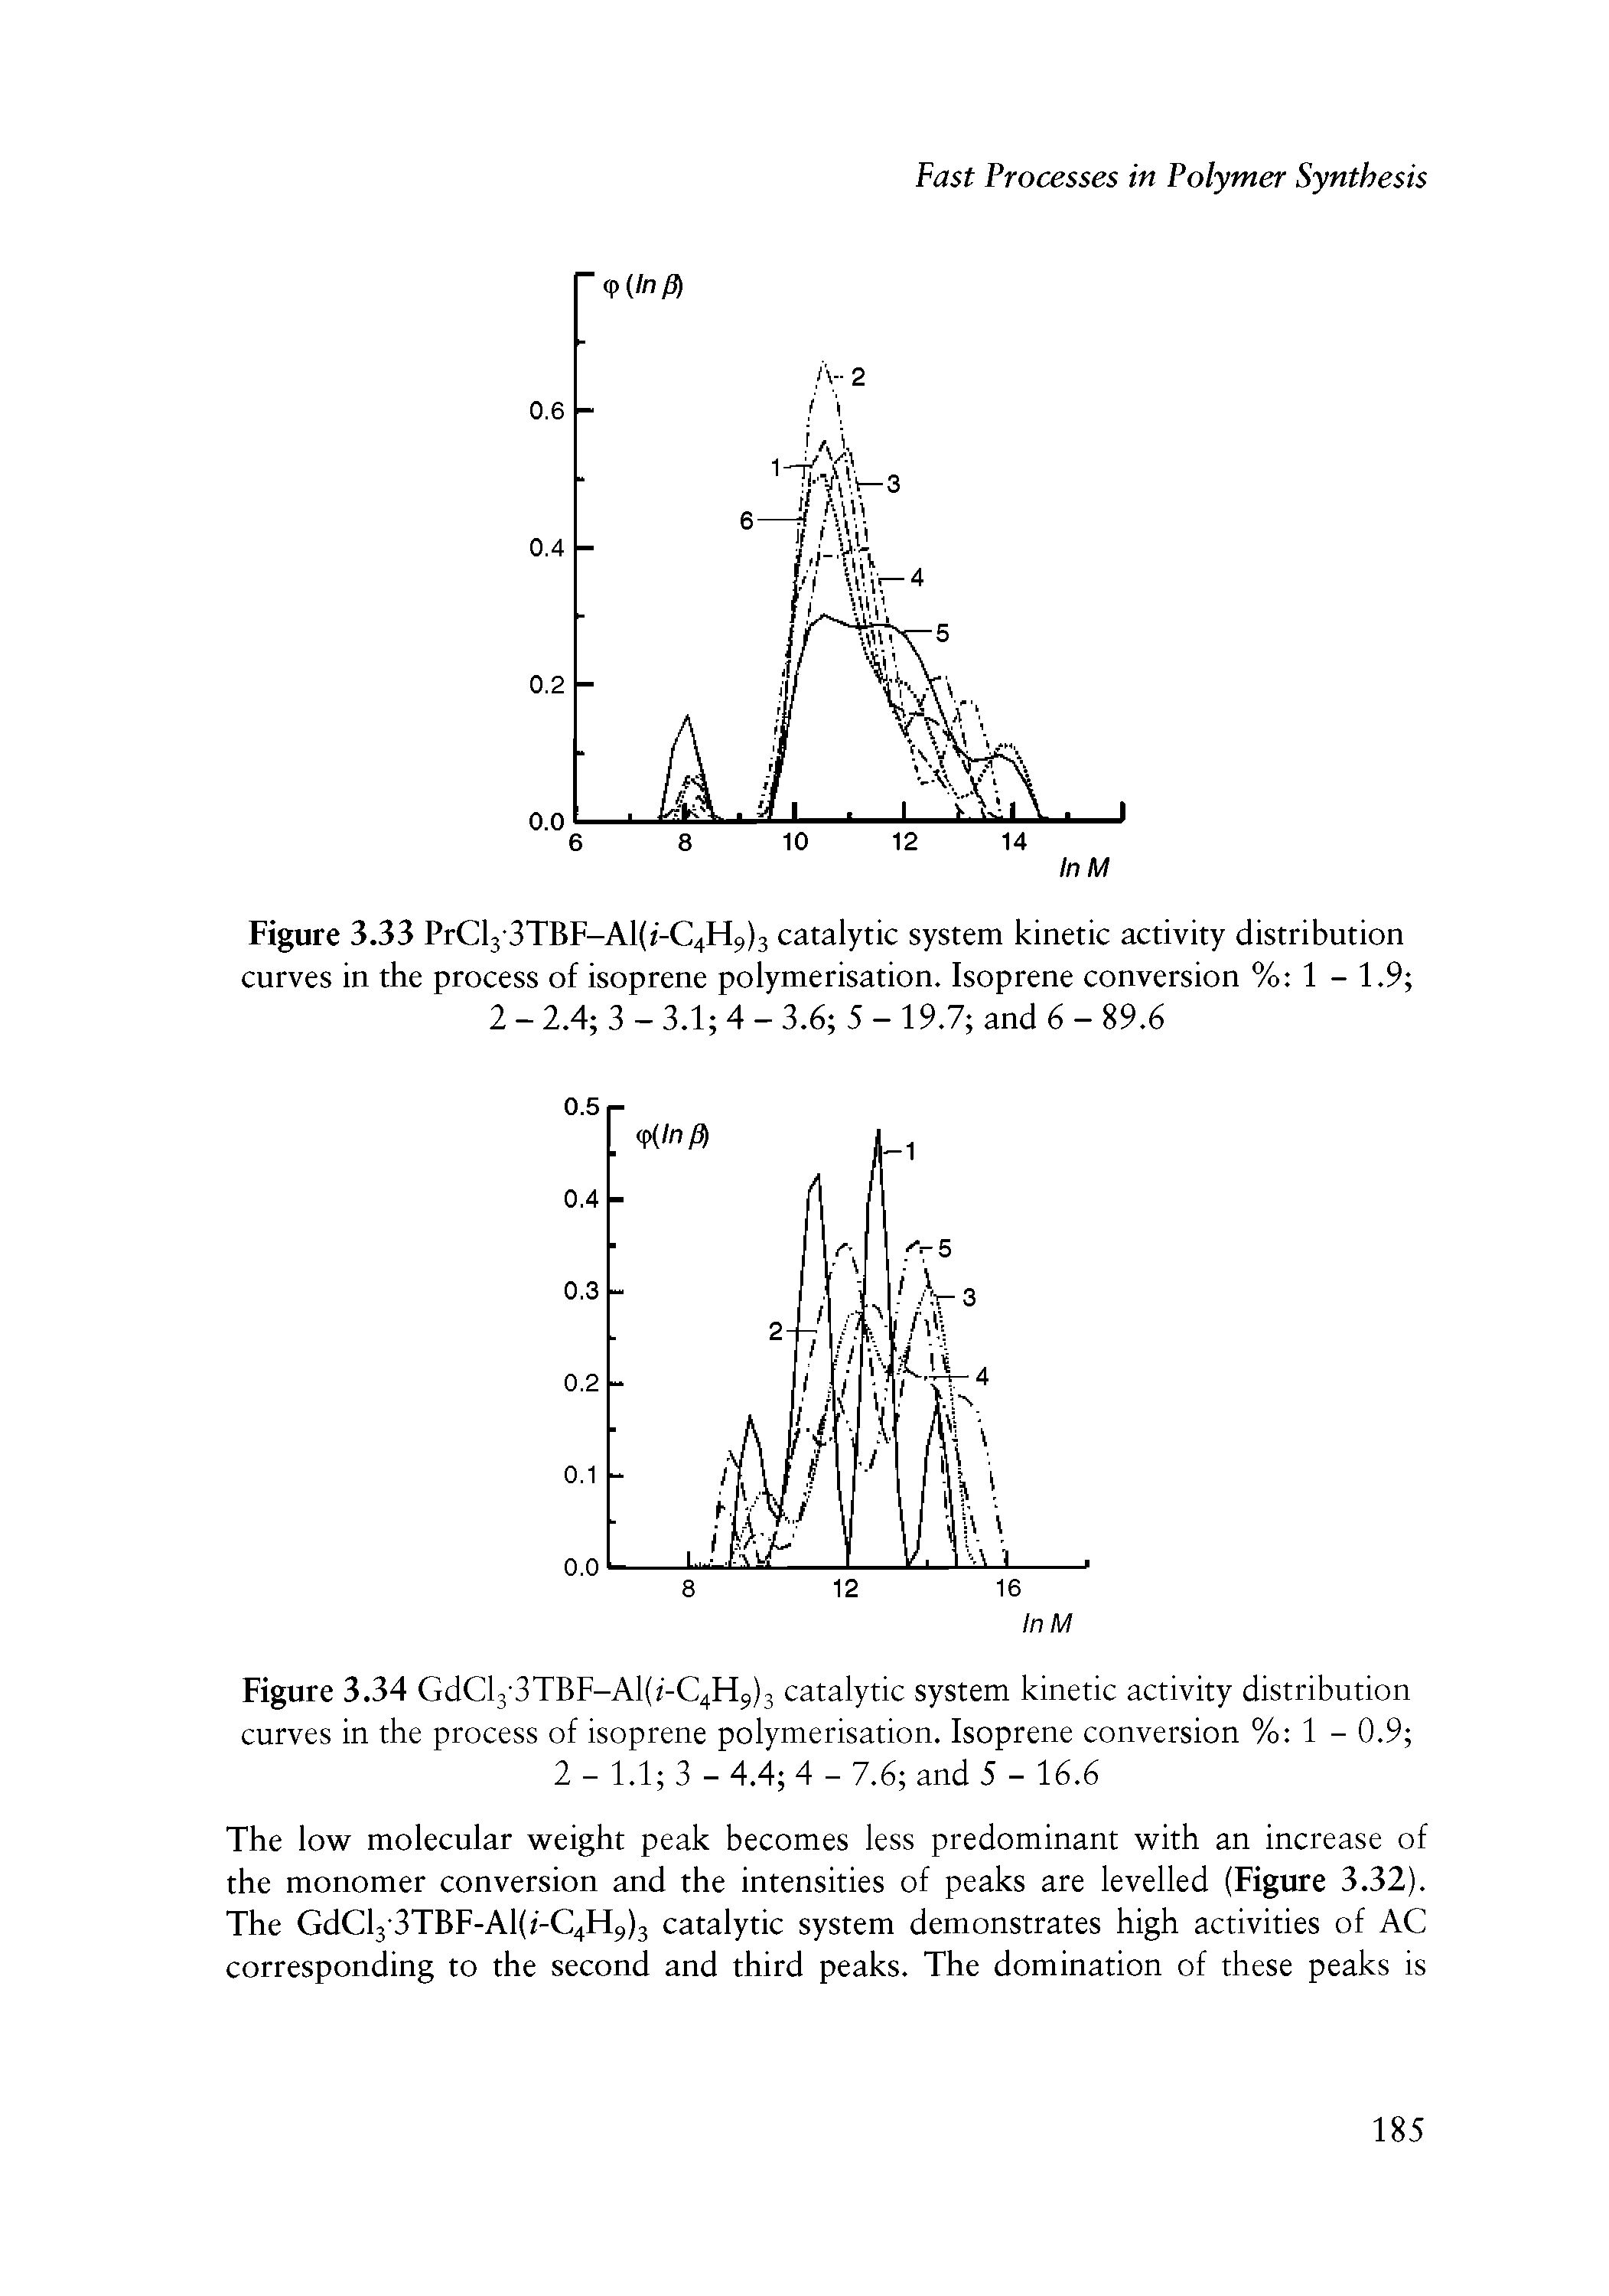 Figure 3.33 PrCl3 3TBF-Al(/-C4H9)3 catalytic system kinetic activity distribution curves in the process of isoprene polymerisation. Isoprene conversion % 1 - 1.9 2 - 2.4 3 - 3.1 4 - 3.6 5 - 19.7 and 6 - 89.6...